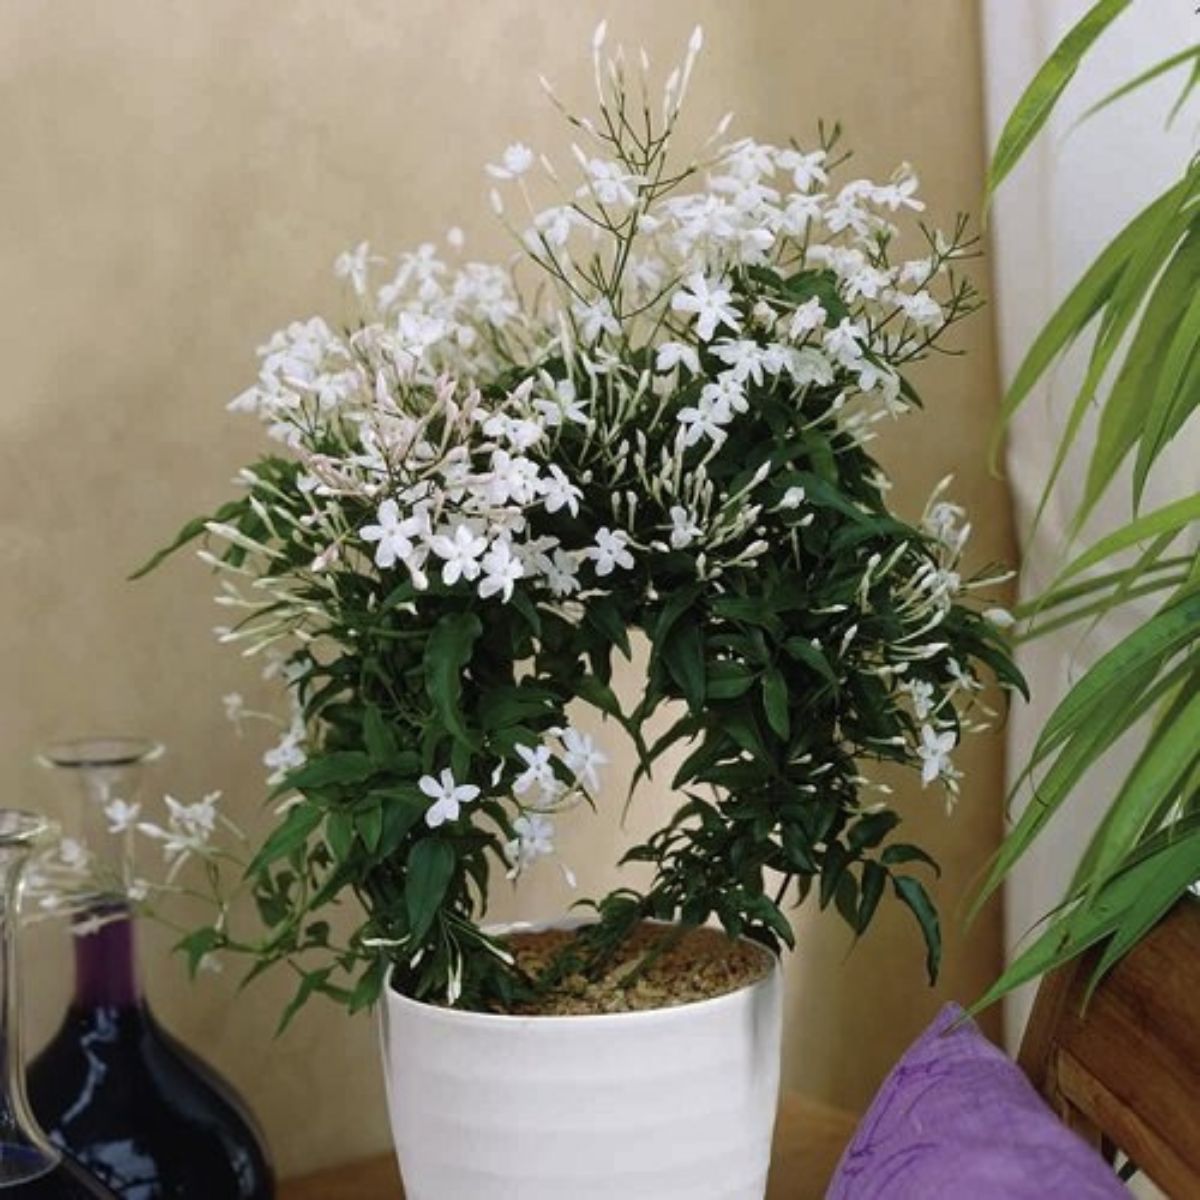 8-fragrant-indoor-houseplants-thatll-make-your-house-smell-lovely-featured